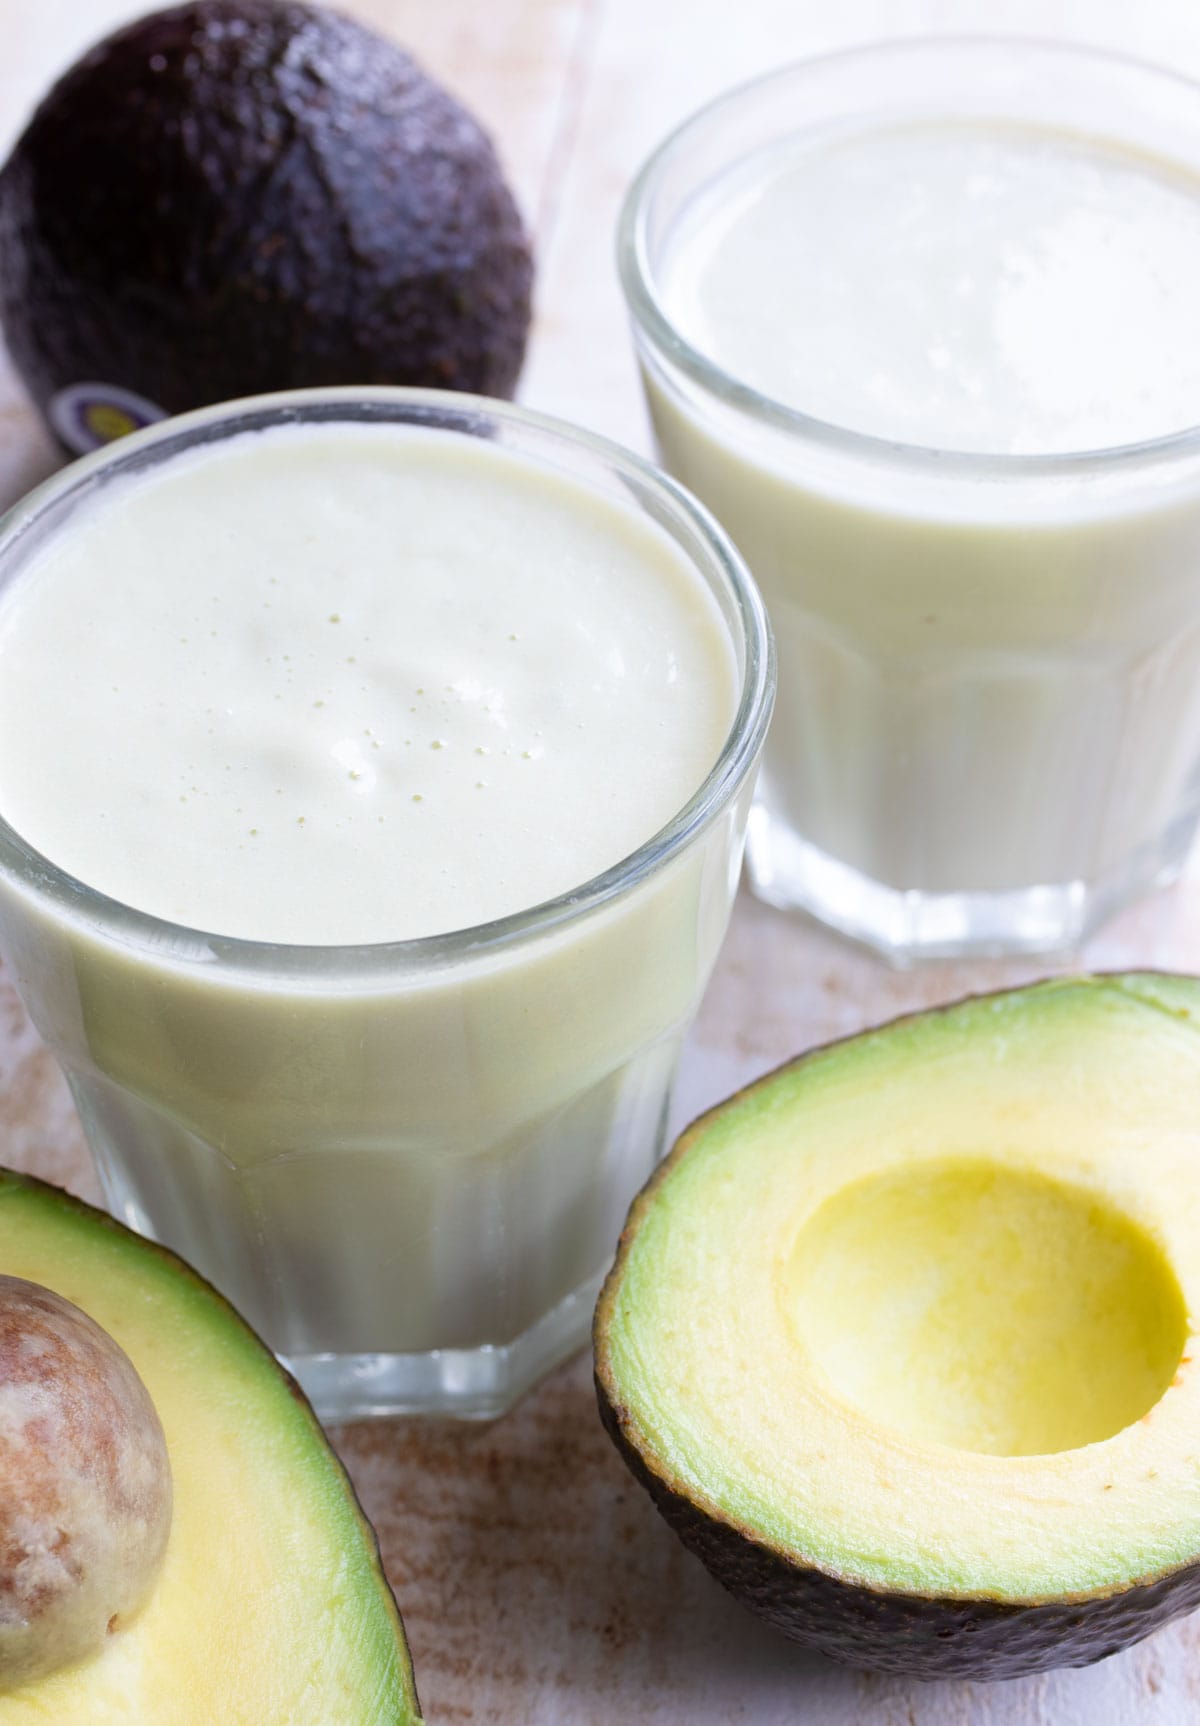 2 glasses with avocado milk and an avocado sliced in half.